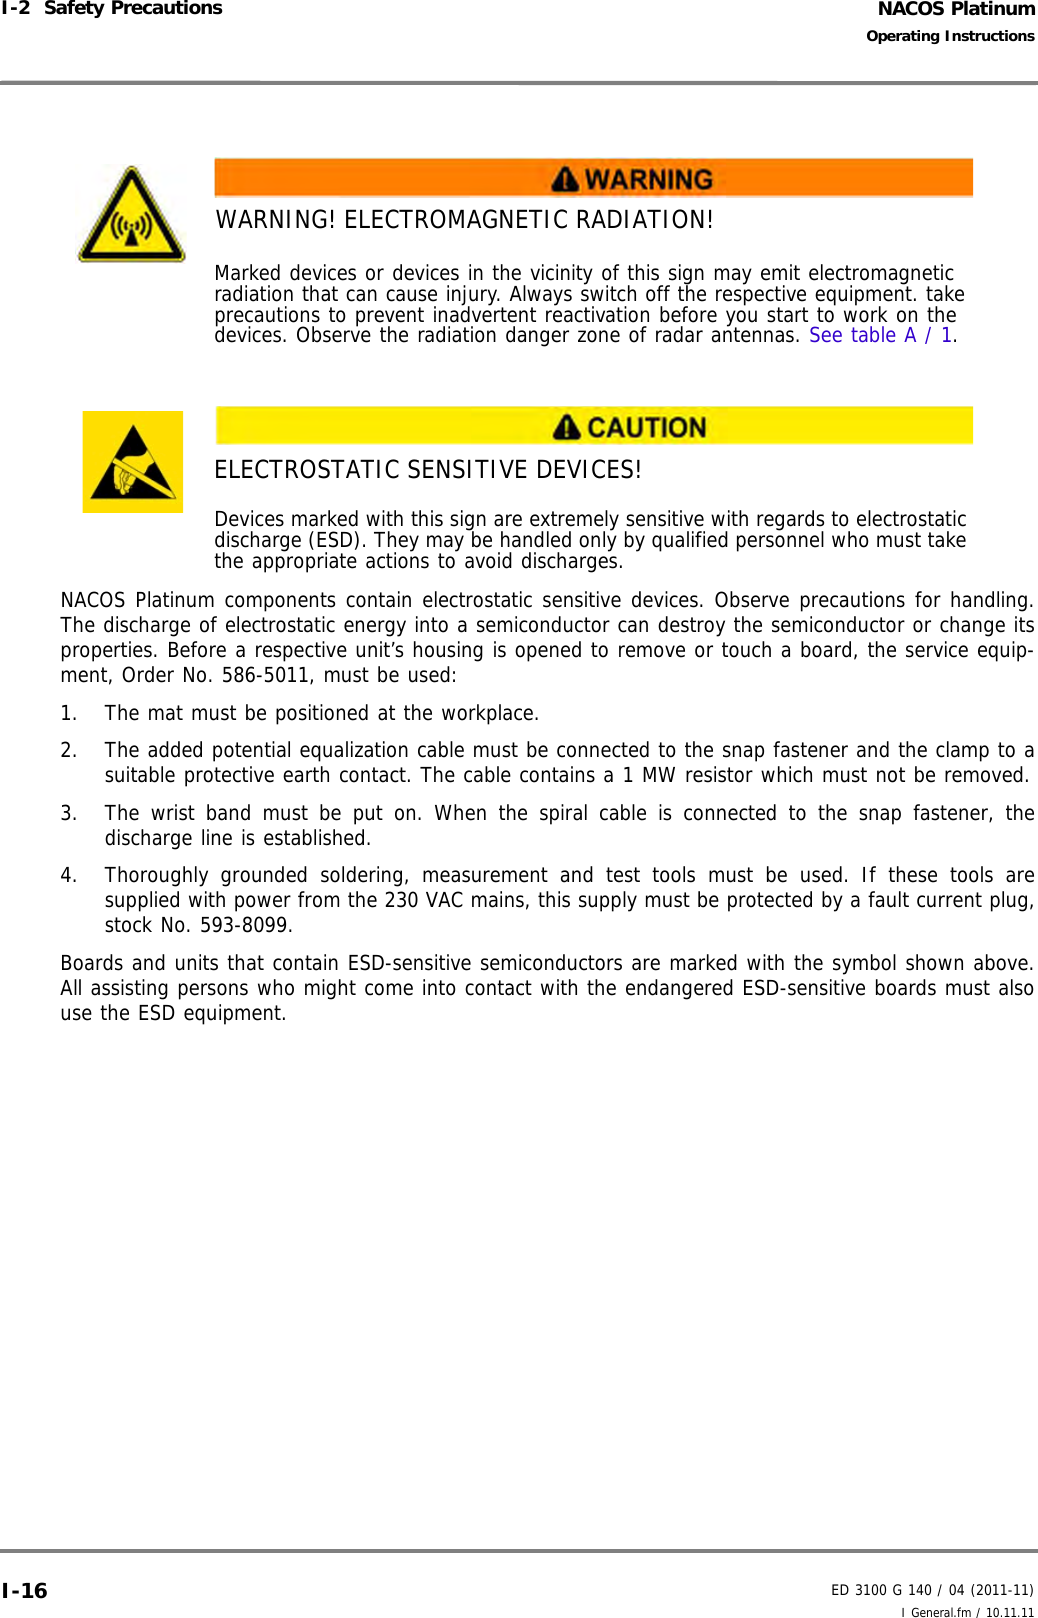 NACOS PlatinumED 3100 G 140 / 04 (2011-11)Operating InstructionsI-2  Safety Precautions I General.fm / 10.11.11I-16NACOS Platinum components contain electrostatic sensitive devices. Observe precautions for handling.The discharge of electrostatic energy into a semiconductor can destroy the semiconductor or change itsproperties. Before a respective unit’s housing is opened to remove or touch a board, the service equip-ment, Order No. 586-5011, must be used: 1. The mat must be positioned at the workplace.2. The added potential equalization cable must be connected to the snap fastener and the clamp to asuitable protective earth contact. The cable contains a 1 MW resistor which must not be removed.3. The wrist band must be put on. When the spiral cable is connected to the snap fastener, thedischarge line is established.4. Thoroughly grounded soldering, measurement and test tools must be used. If these tools aresupplied with power from the 230 VAC mains, this supply must be protected by a fault current plug,stock No. 593-8099.Boards and units that contain ESD-sensitive semiconductors are marked with the symbol shown above.All assisting persons who might come into contact with the endangered ESD-sensitive boards must alsouse the ESD equipment.WARNING! ELECTROMAGNETIC RADIATION!Marked devices or devices in the vicinity of this sign may emit electromagnetic radiation that can cause injury. Always switch off the respective equipment. take precautions to prevent inadvertent reactivation before you start to work on the devices. Observe the radiation danger zone of radar antennas. See table A / 1. ELECTROSTATIC SENSITIVE DEVICES!Devices marked with this sign are extremely sensitive with regards to electrostatic discharge (ESD). They may be handled only by qualified personnel who must take the appropriate actions to avoid discharges. 